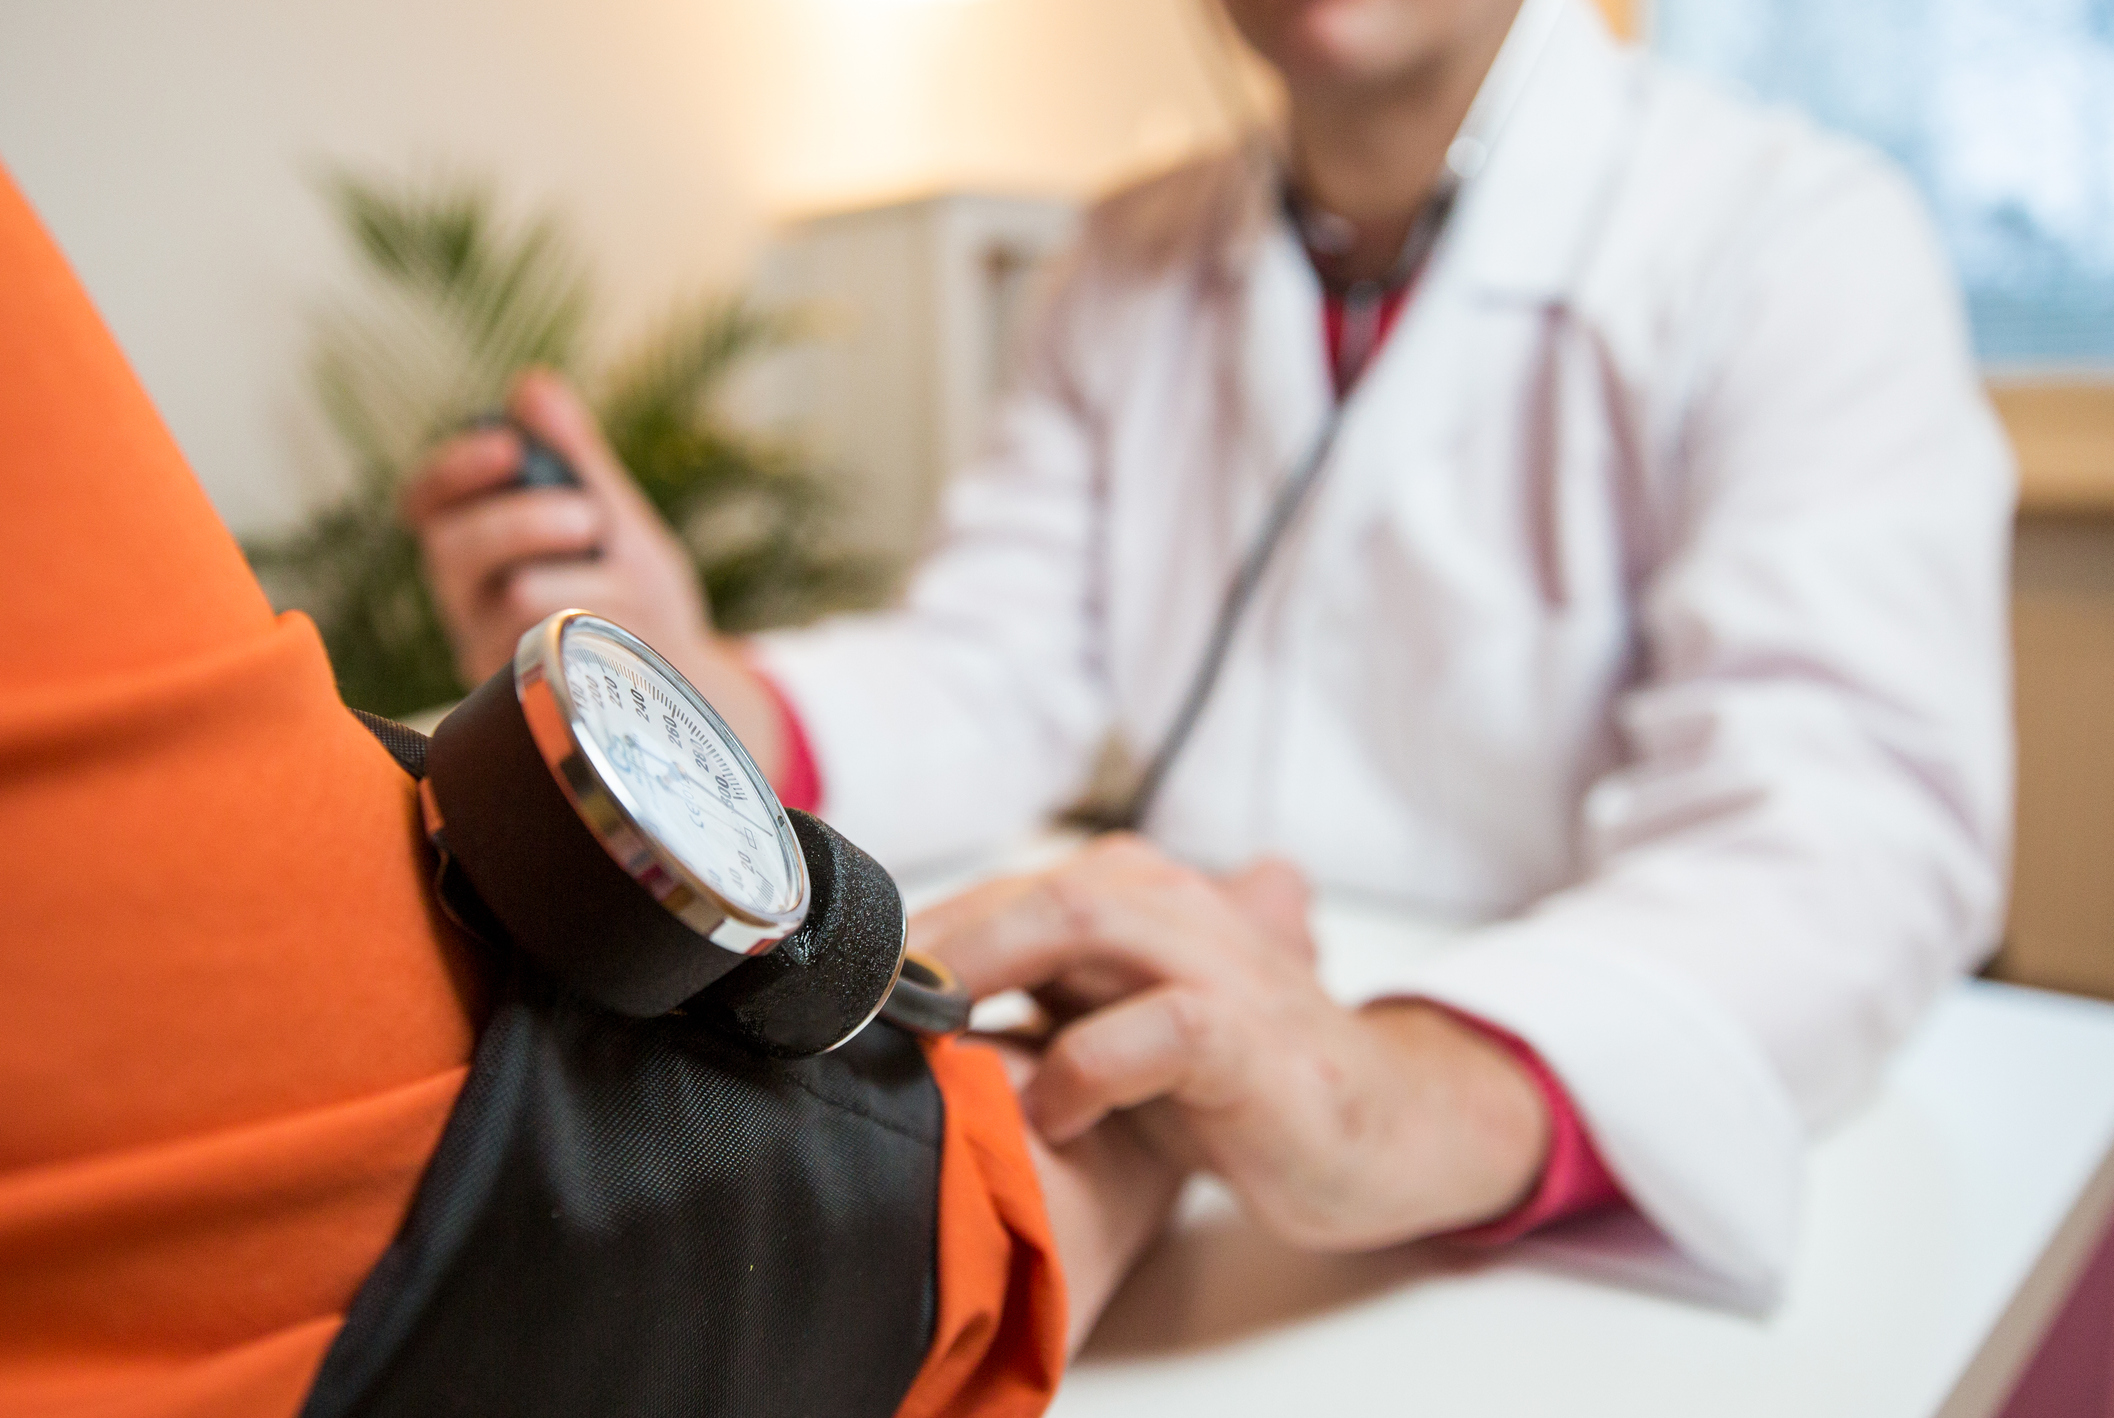 10-minute test helps detect ‘curable’ hypertension